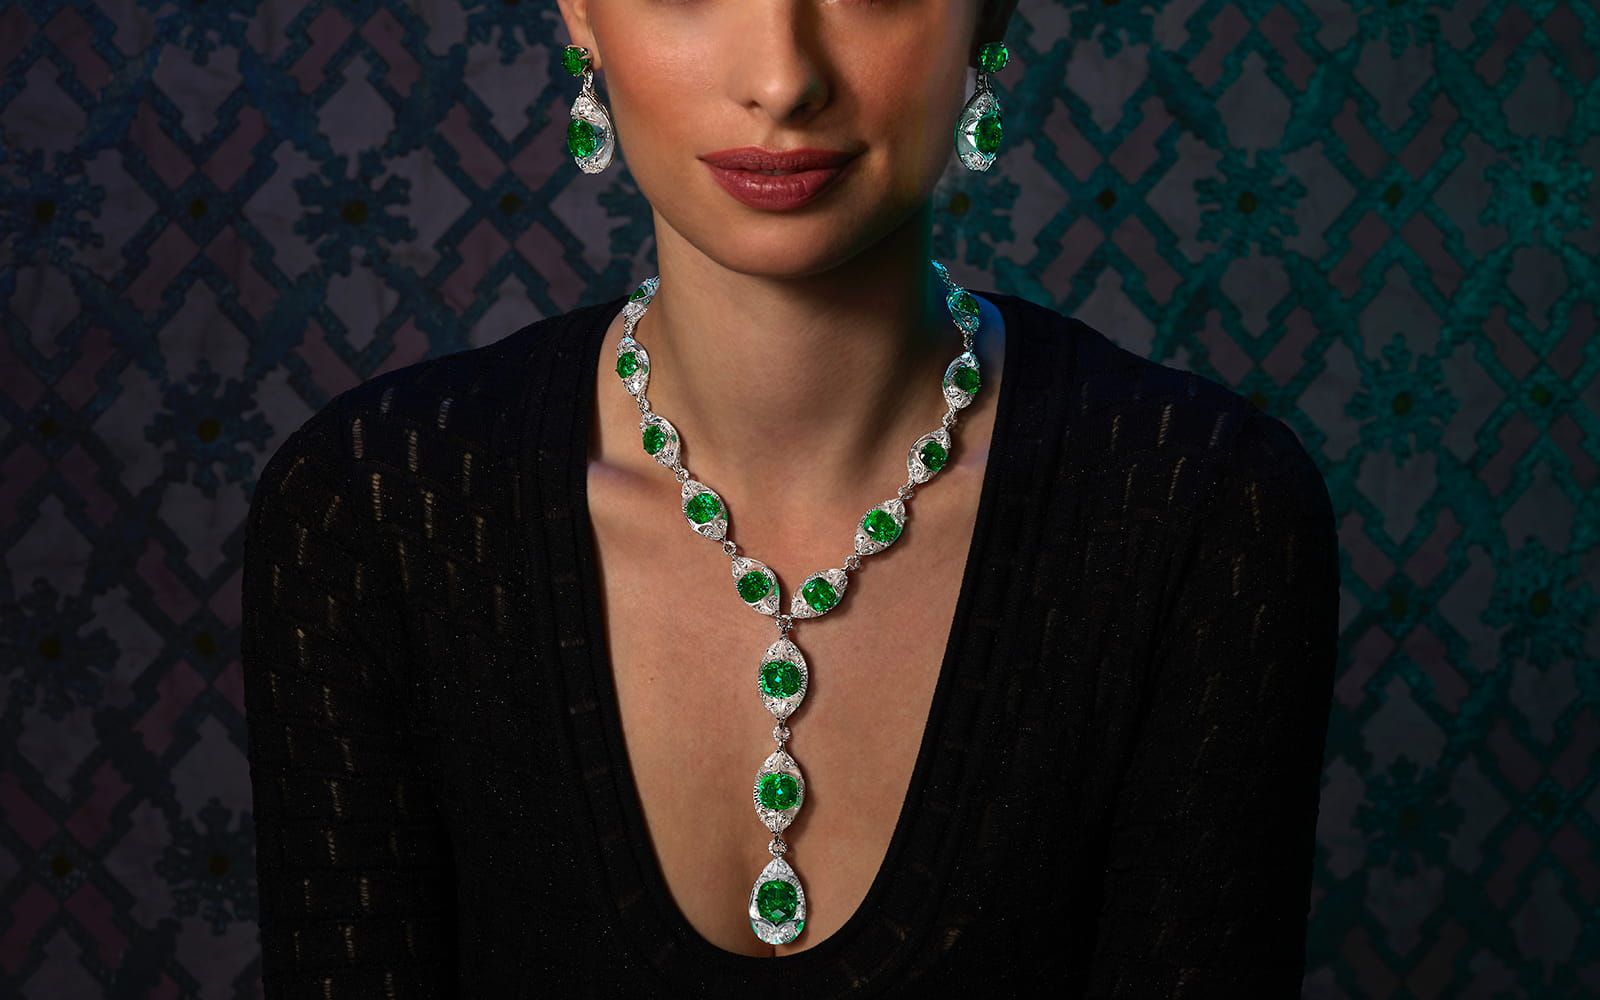 Model wearing a Moussaieff High Jewellery suite in white gold, rock crystal, emerald and diamond